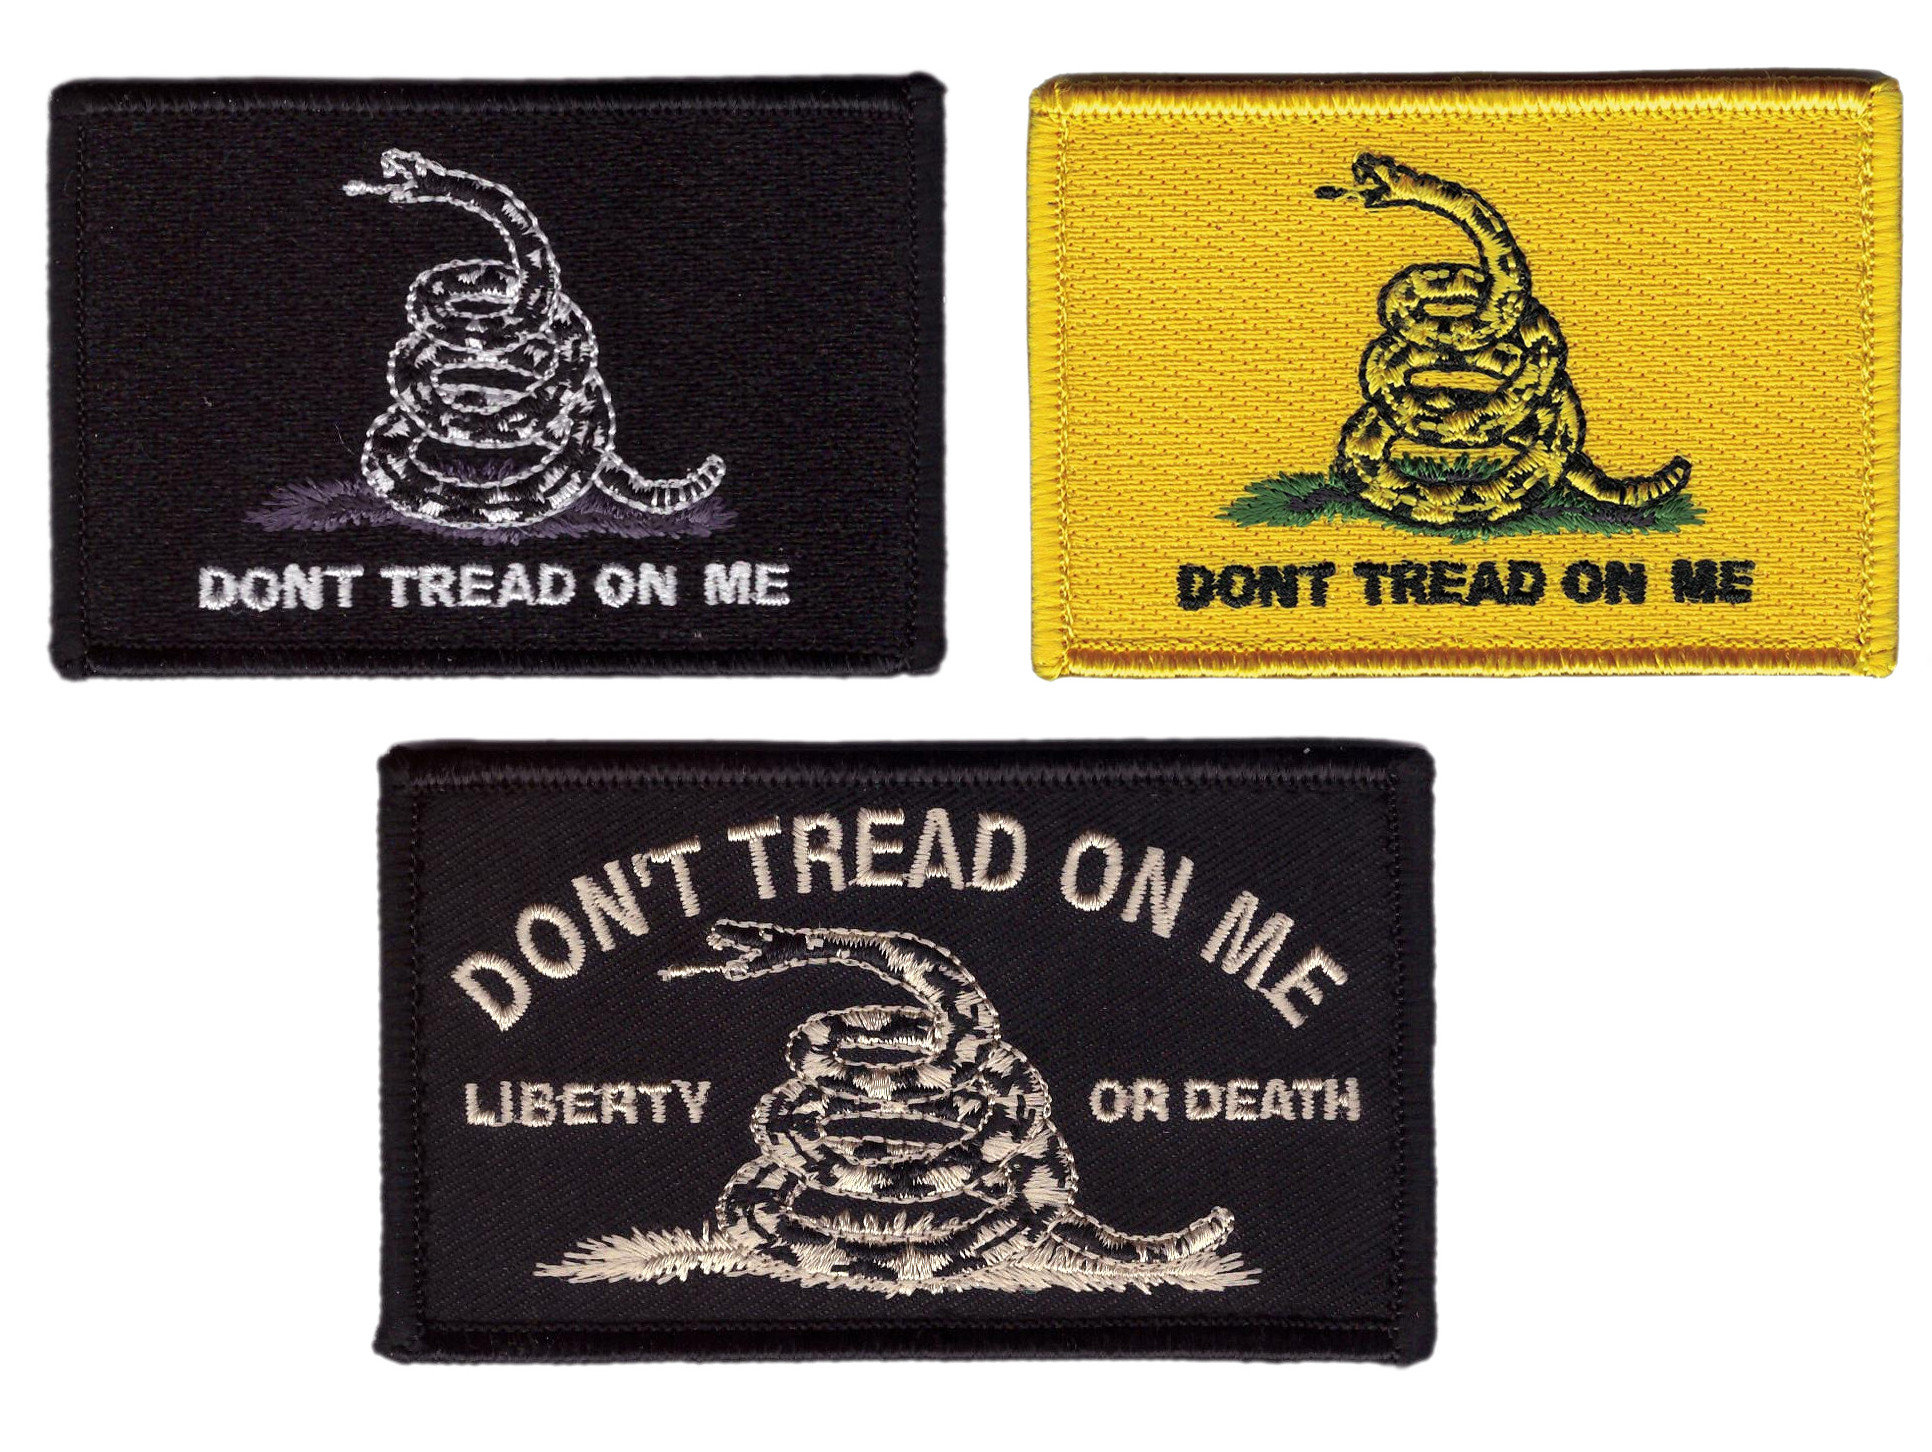 Updated: Funny No Step on Snek Patch/dtom Patch/nwu Patch/tactical Patch//morale  Patch/us Flag Patch/tactical Military Flag/gadsden Flag 